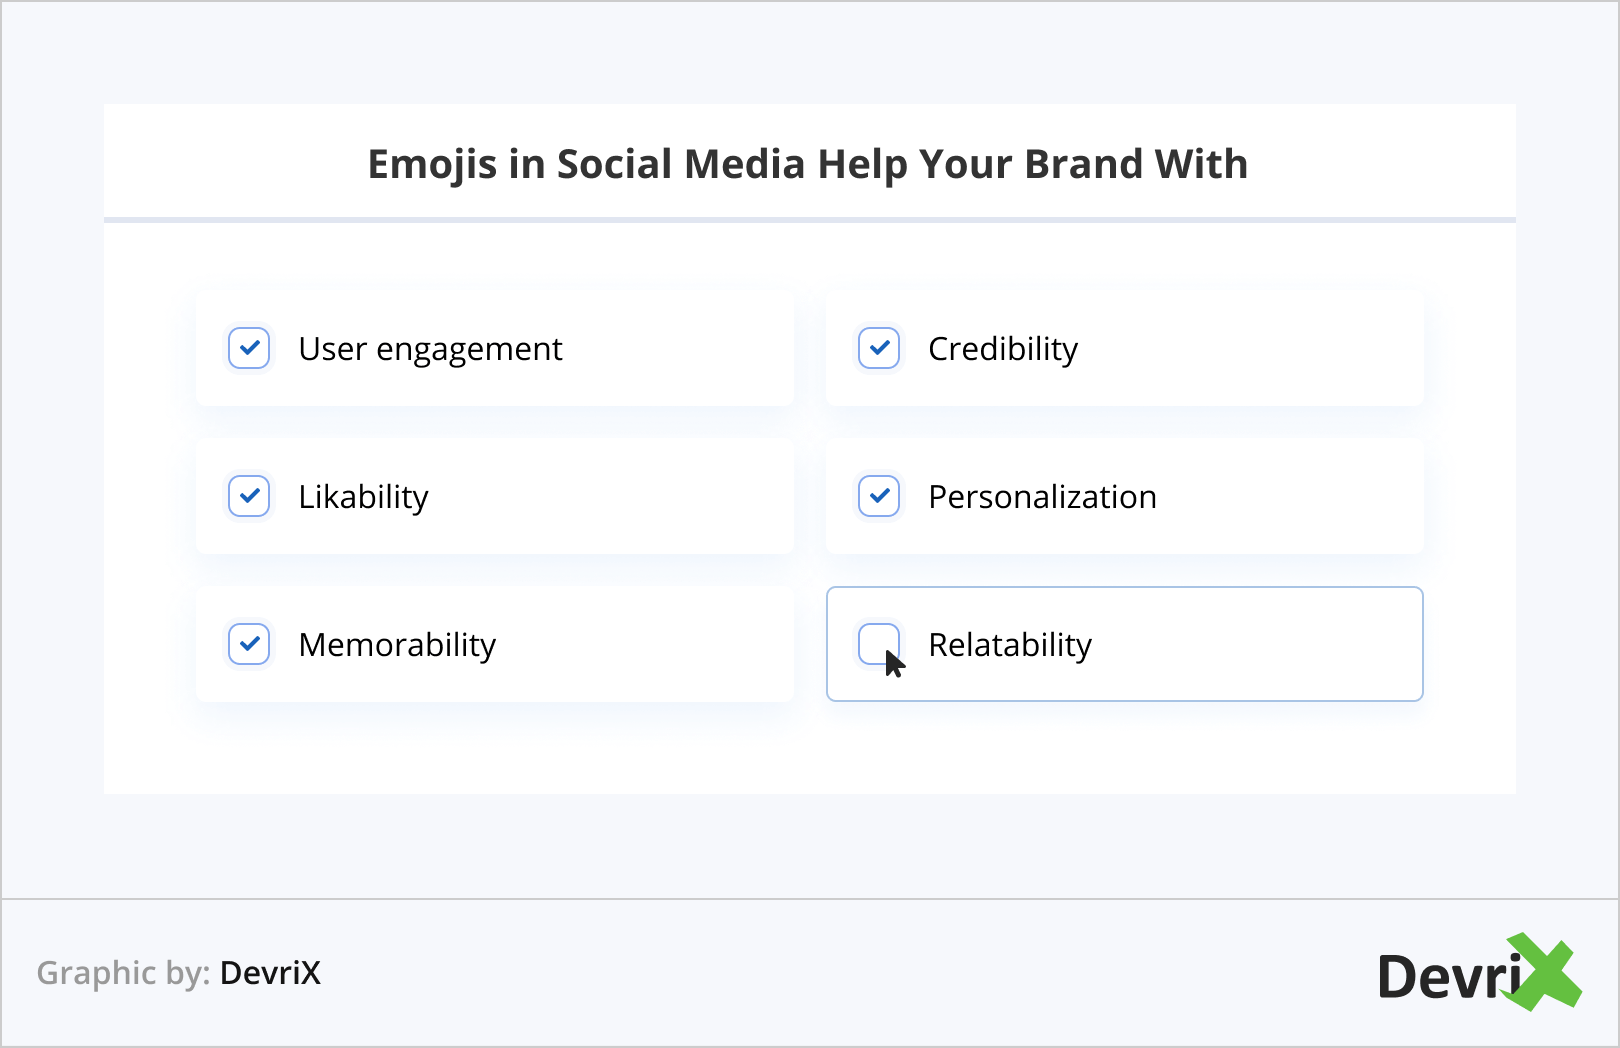 Emojis in Social Media Help Your Brand With